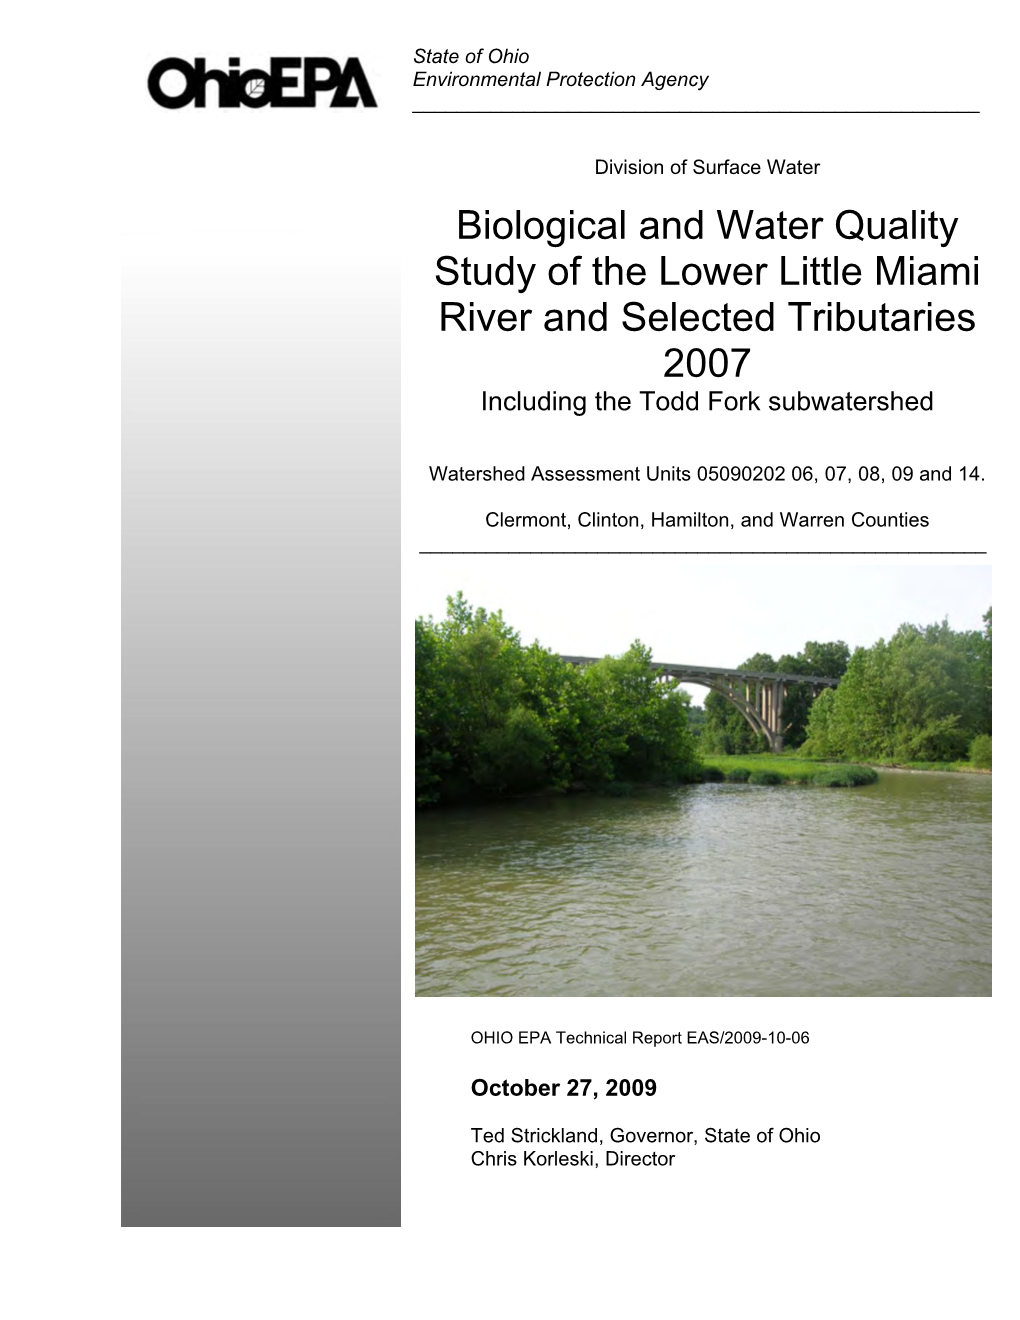 Biological and Water Quality Study of the Lower Little Miami River and Selected Tributaries 2007 Including the Todd Fork Subwatershed